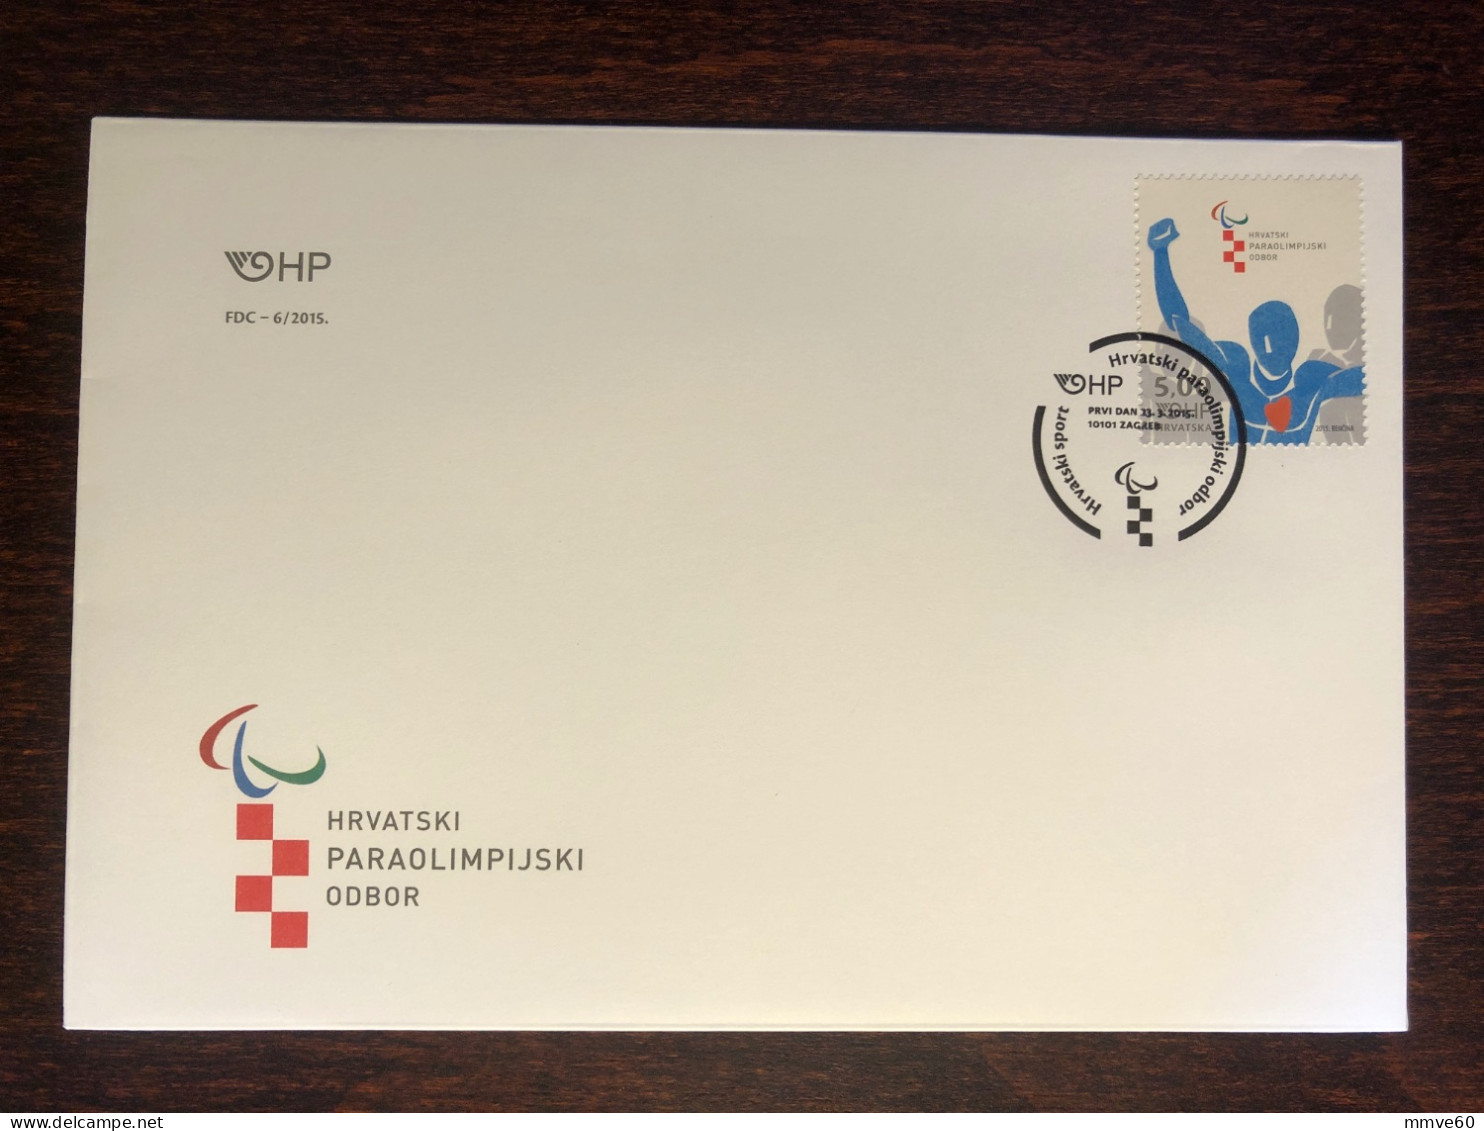 CROATIA FDC COVER 2015 YEAR PARALYMPIC DISABLED SPORTS HEALTH MEDICINE STAMPS - Croazia